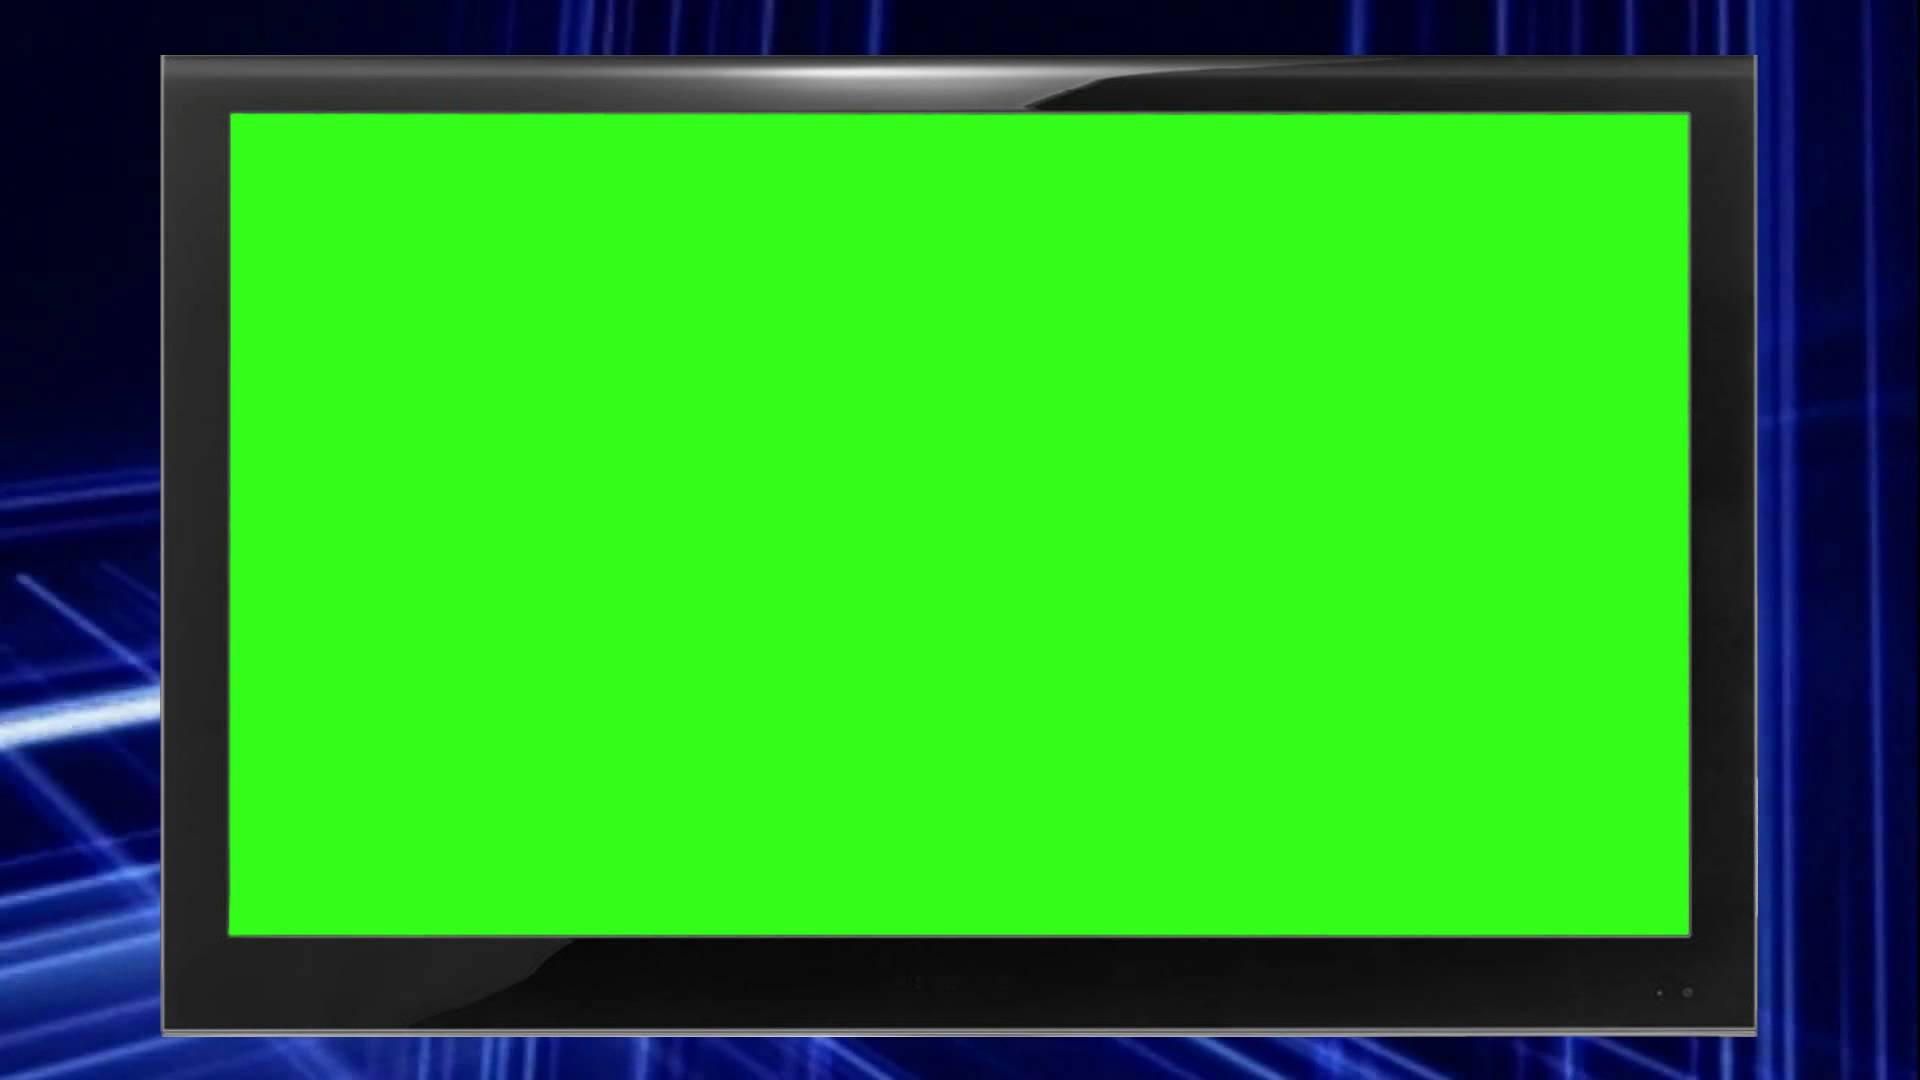 green screen background images video